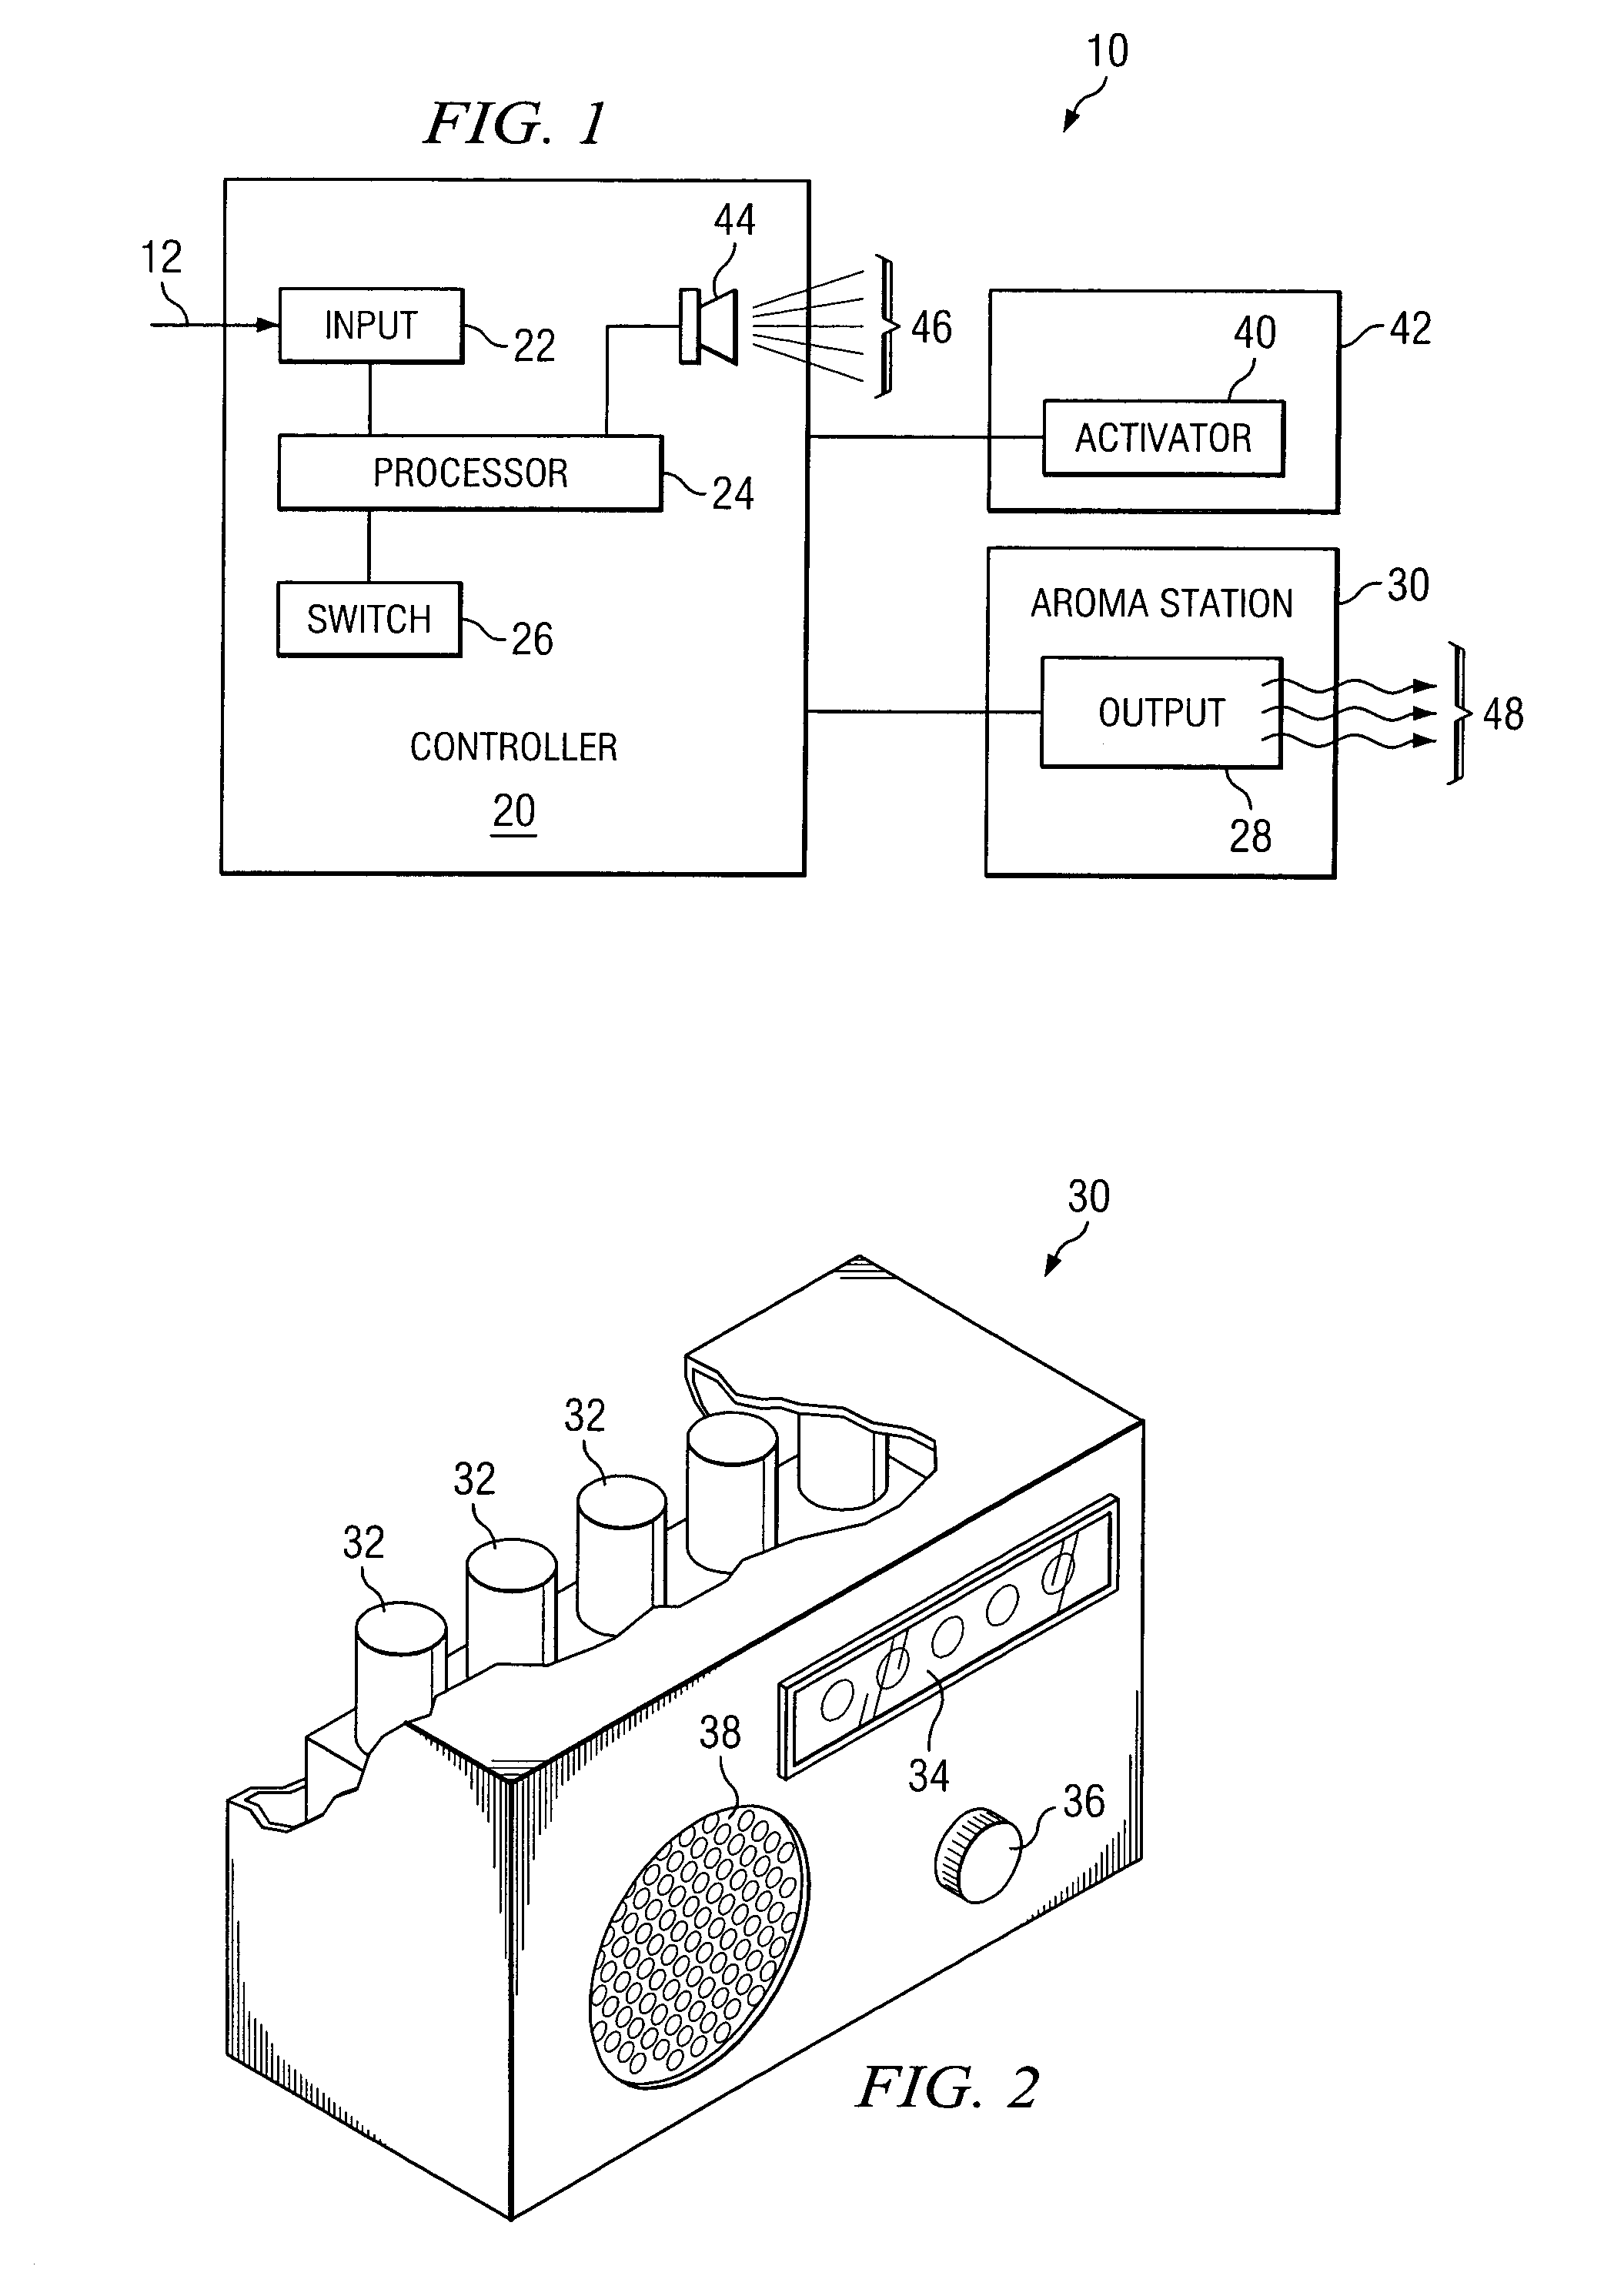 System and method for an alarm with aroma selection